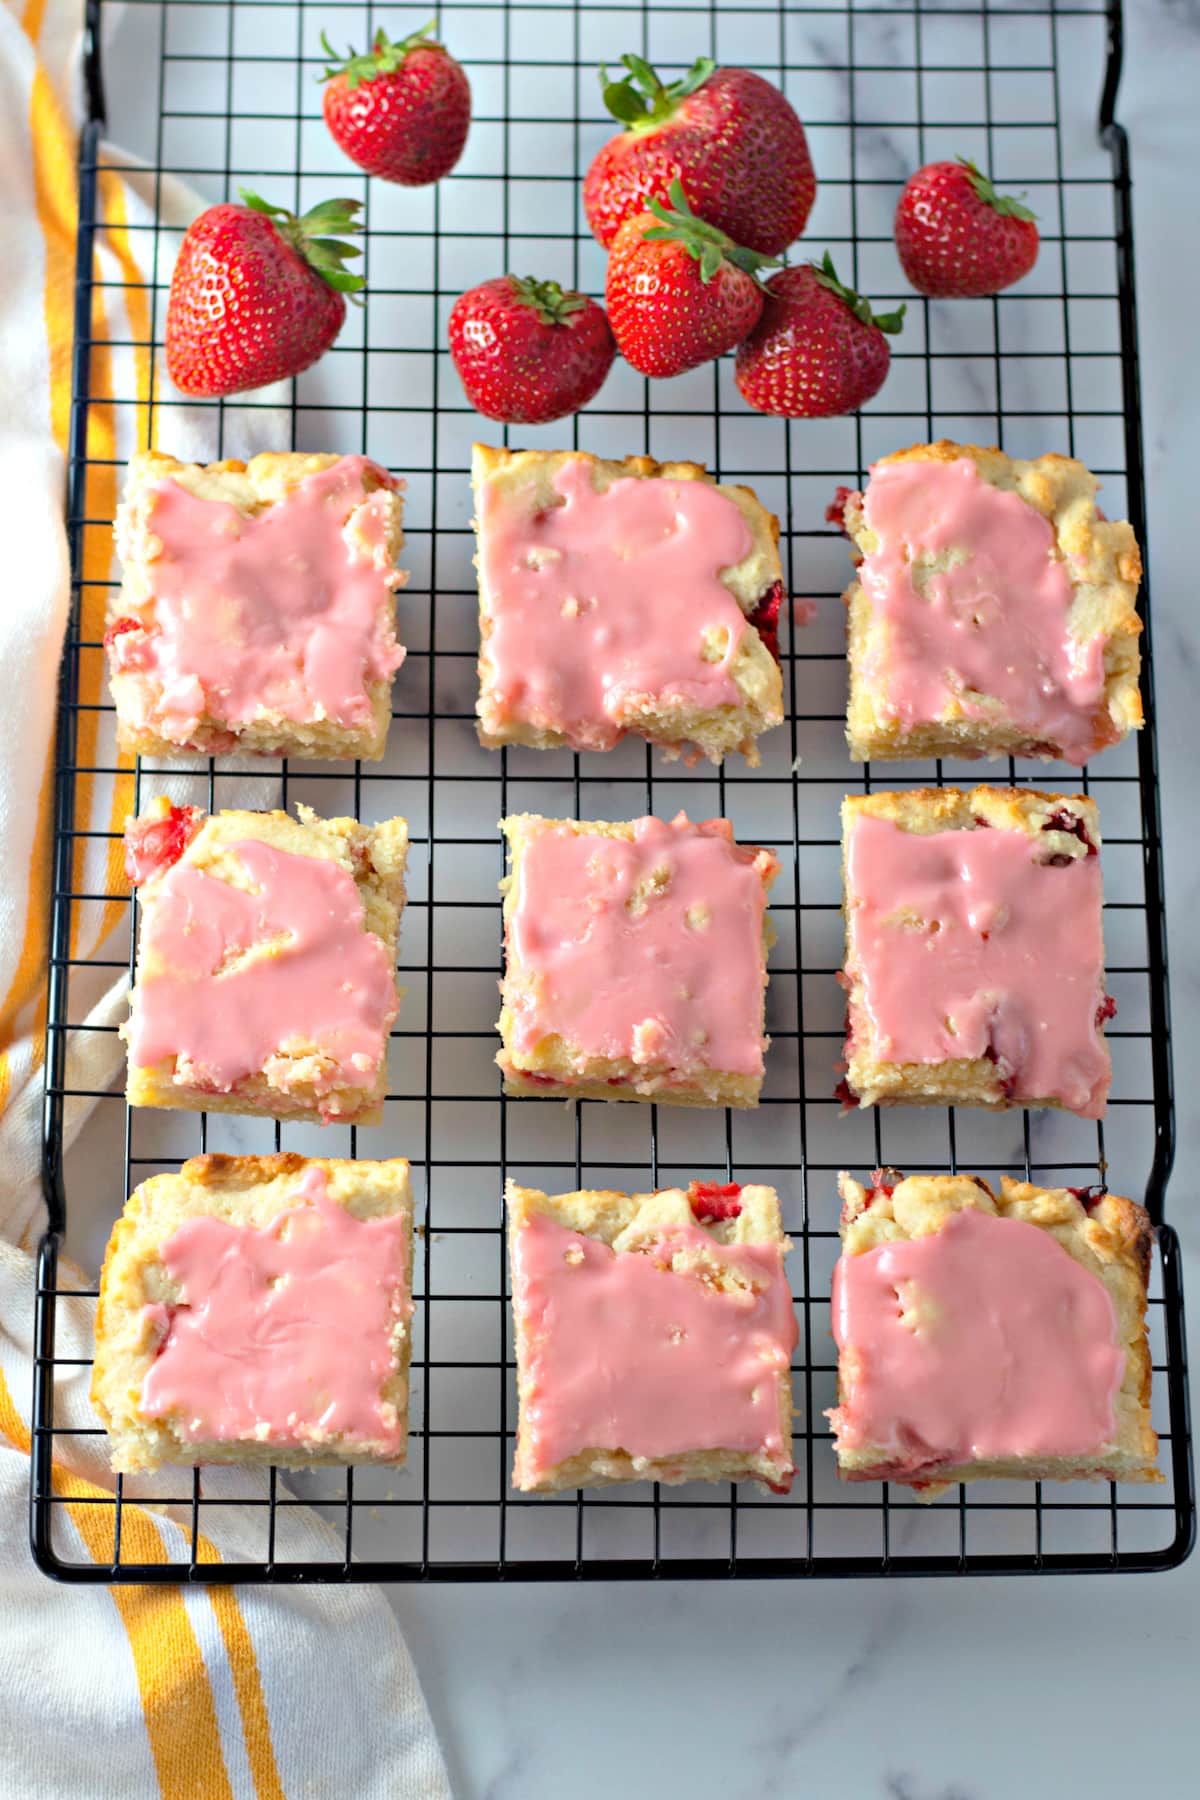 Rows of frosted strawberry lemon blondies on a wire rack next to fresh strawberries.